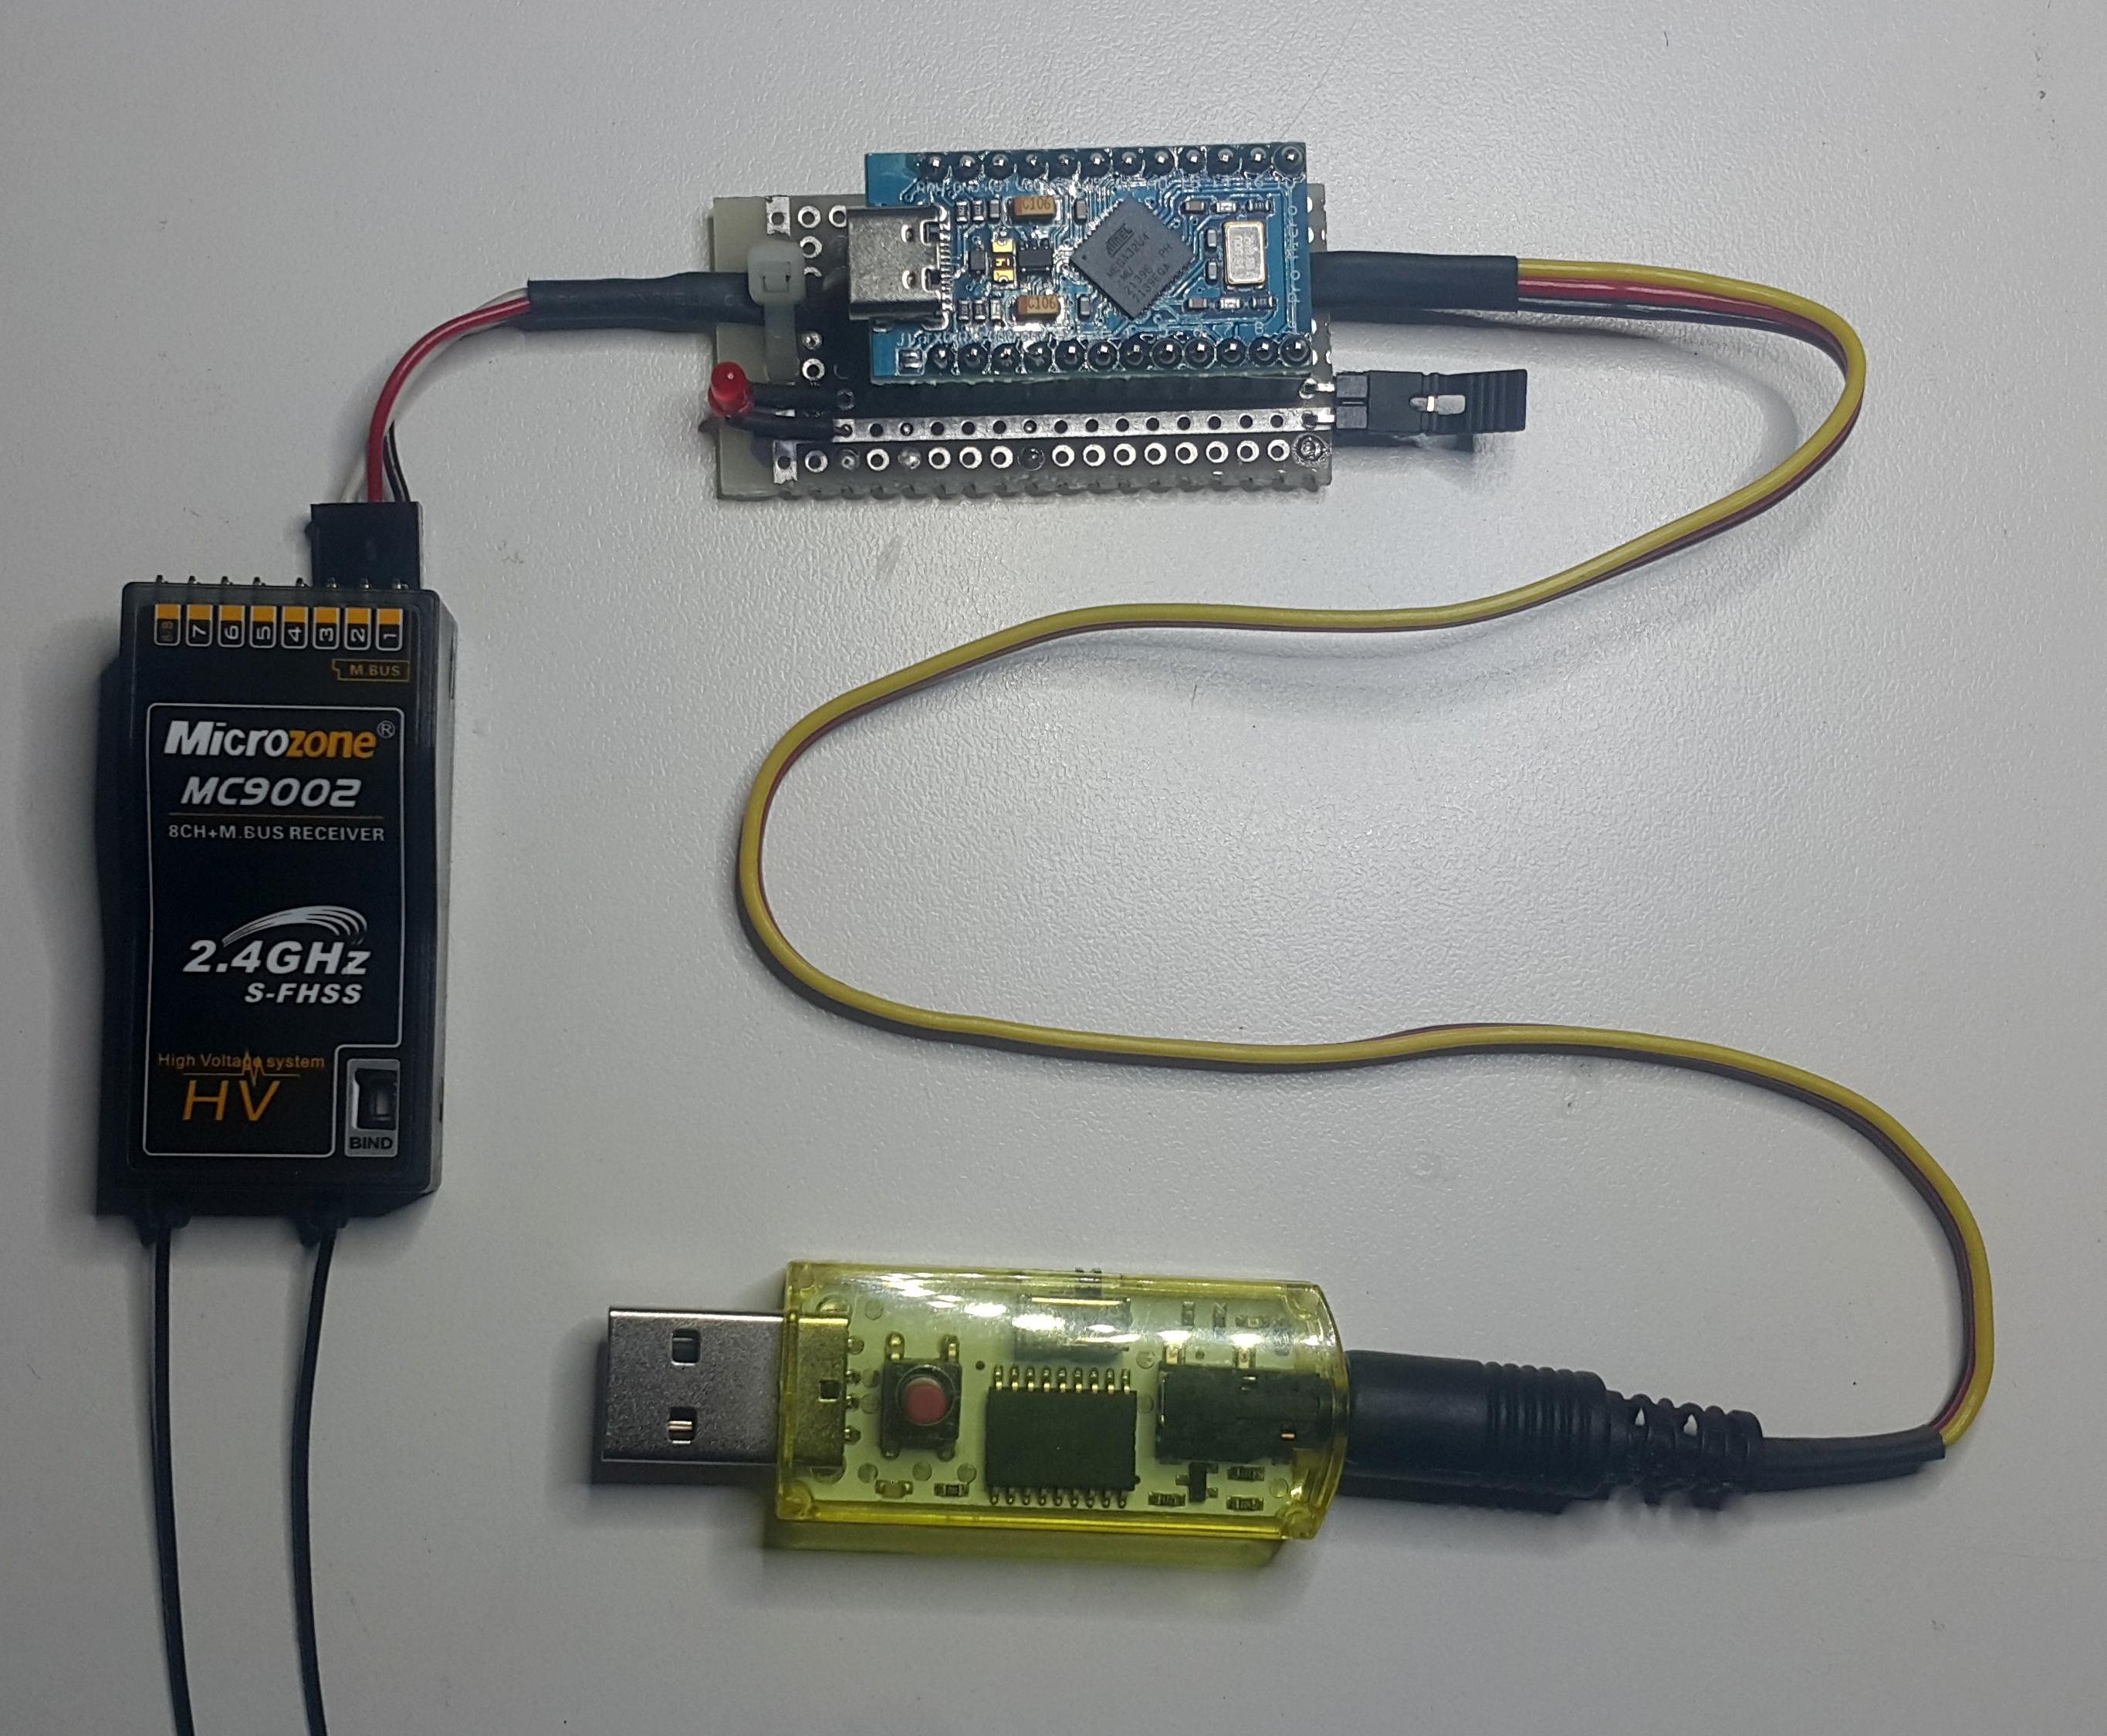 SBUS to PPM and PWM Decoder Using Arduino Timer Interrupts. PART 2: SBUS to PPM (Trainer Port) Converter